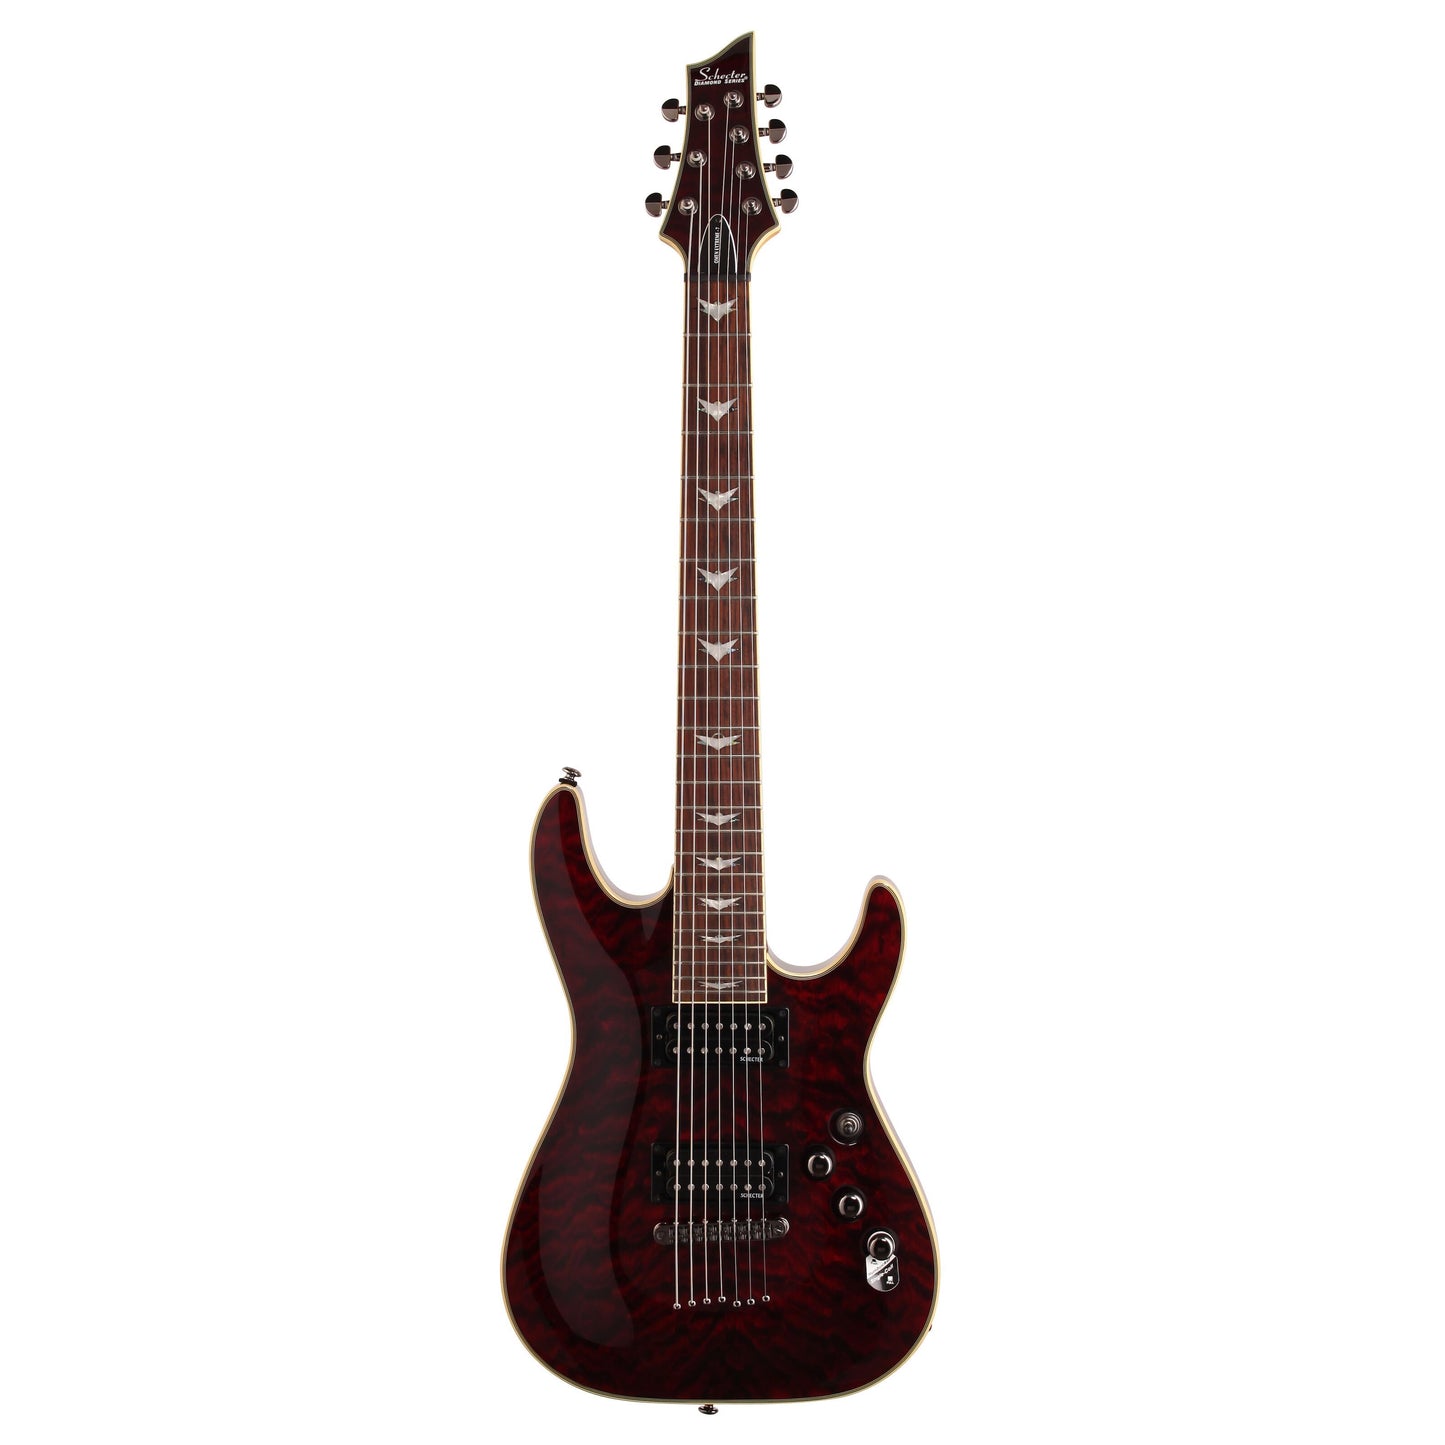 Schecter Omen Extreme 7-String Electric Guitar, Black Cherry